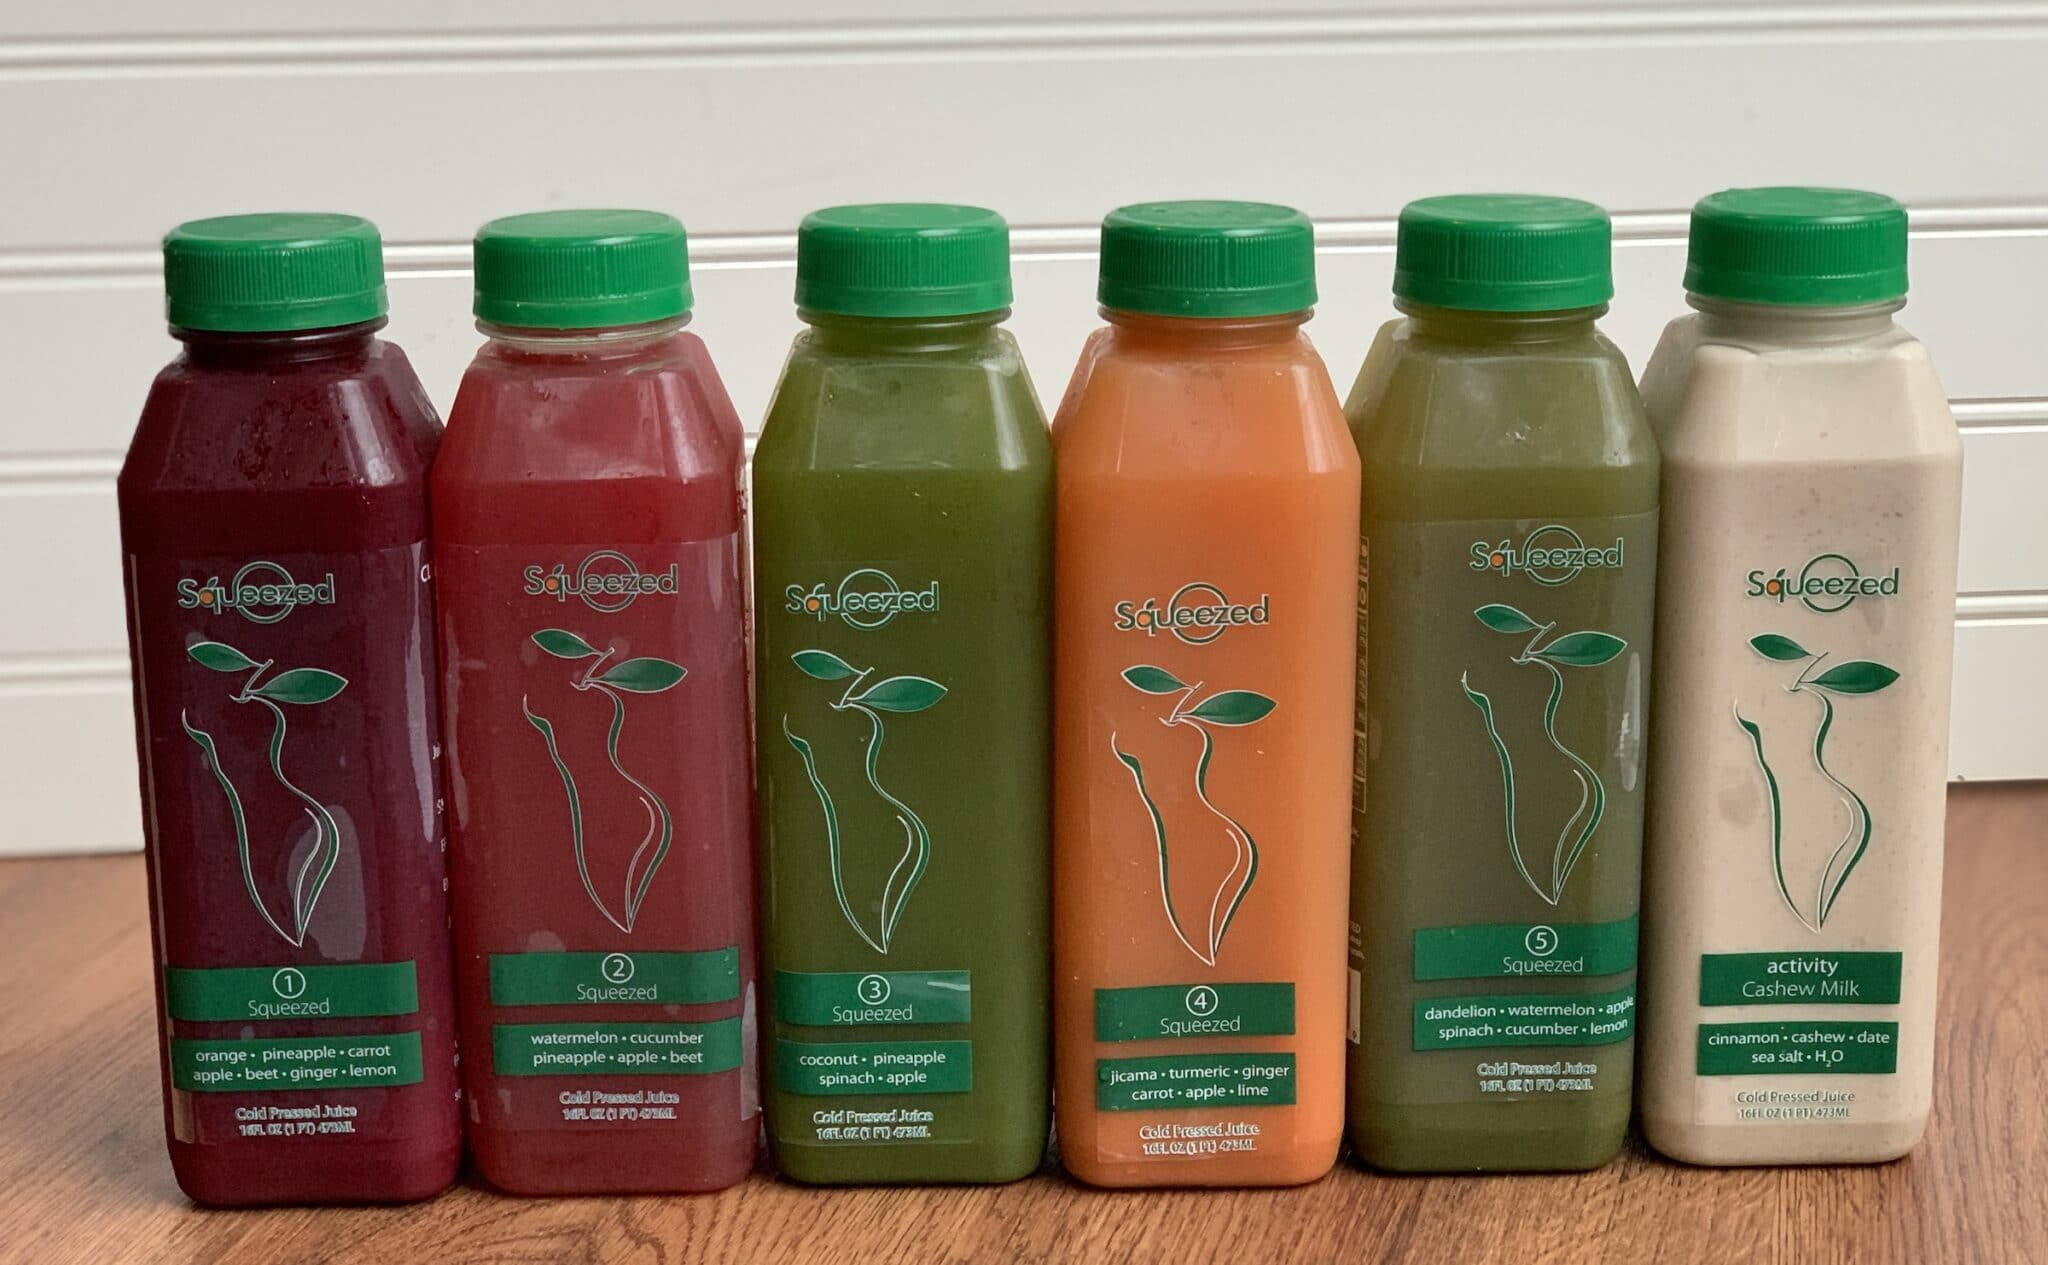 Squeezed cleanse line up